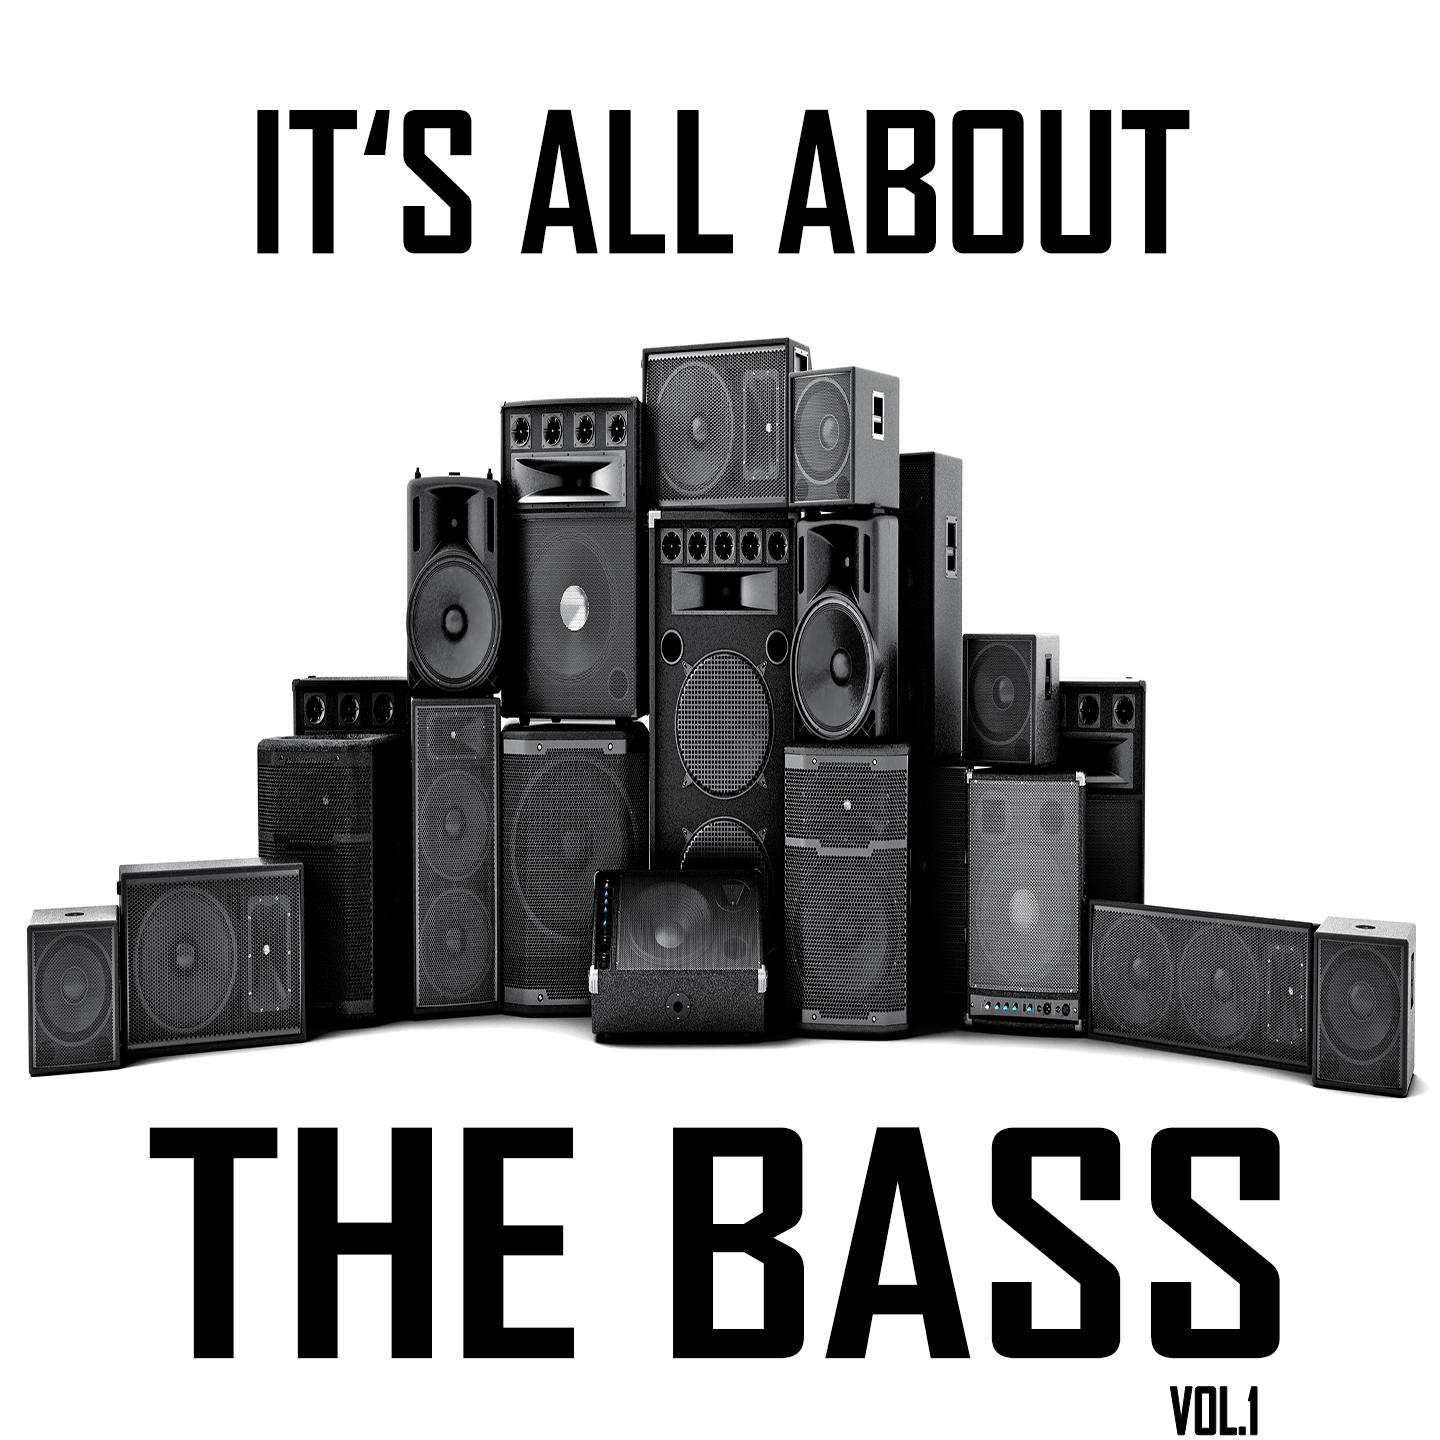 It's All About the Bass, Vol. 1 (Hardstyle Meets Electro Bass)专辑